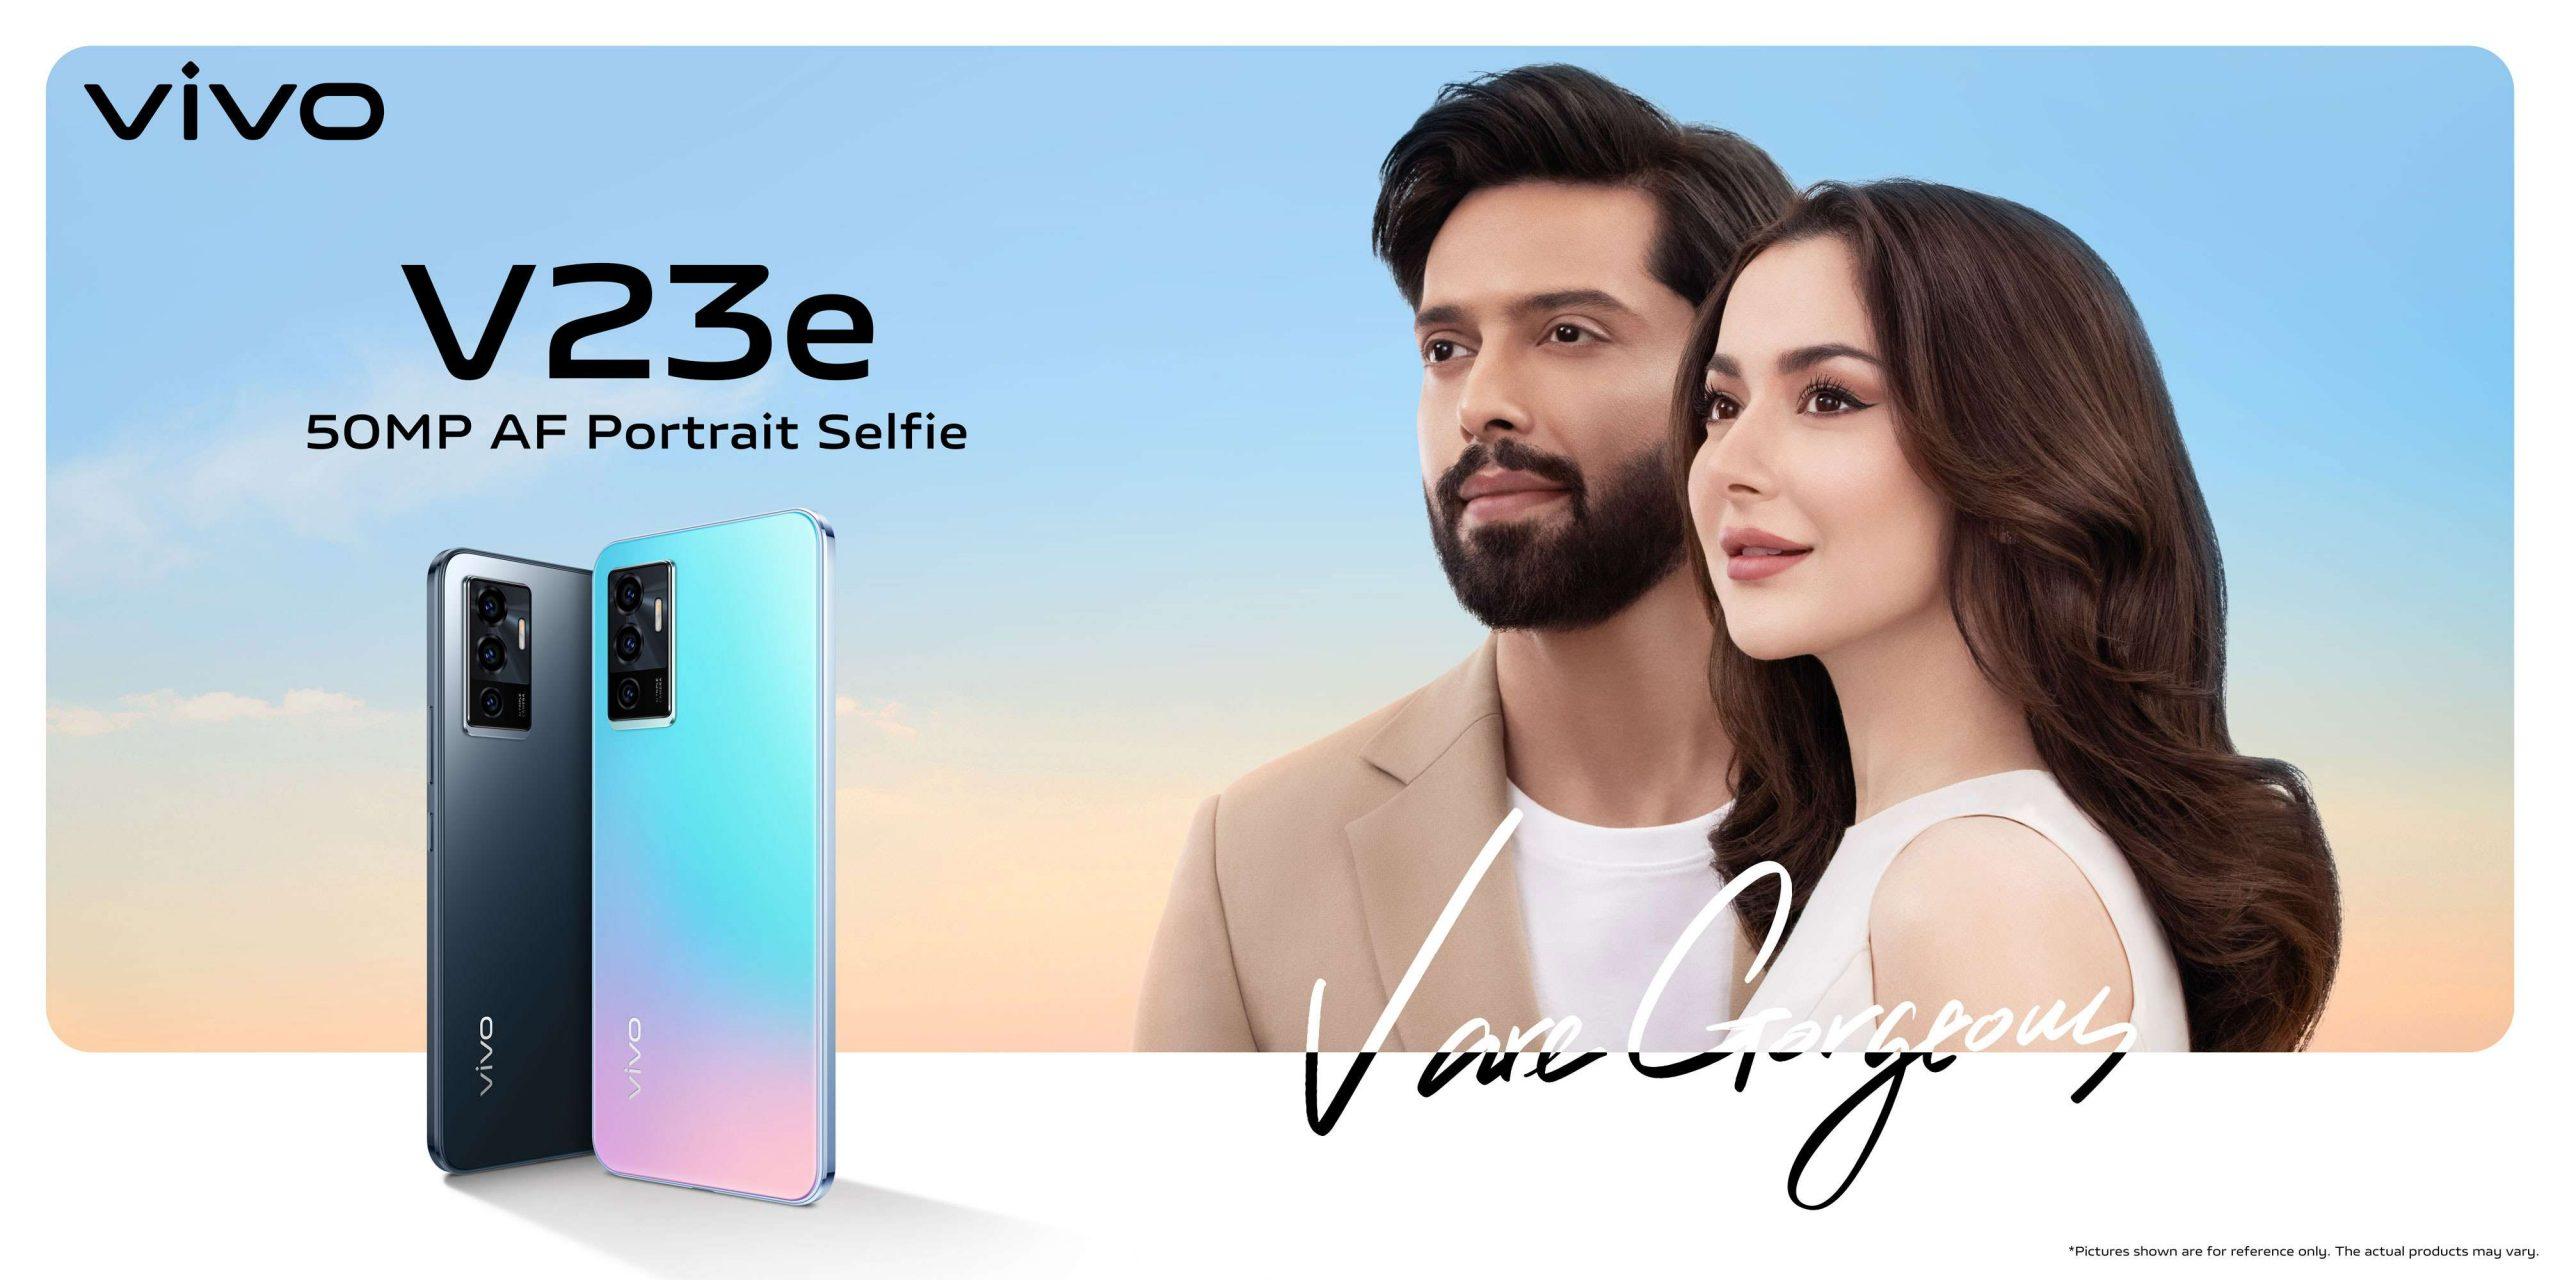 vivo V23e (256GB Version) with 50MP AF Portrait Selfie is Now Available in Pakistan